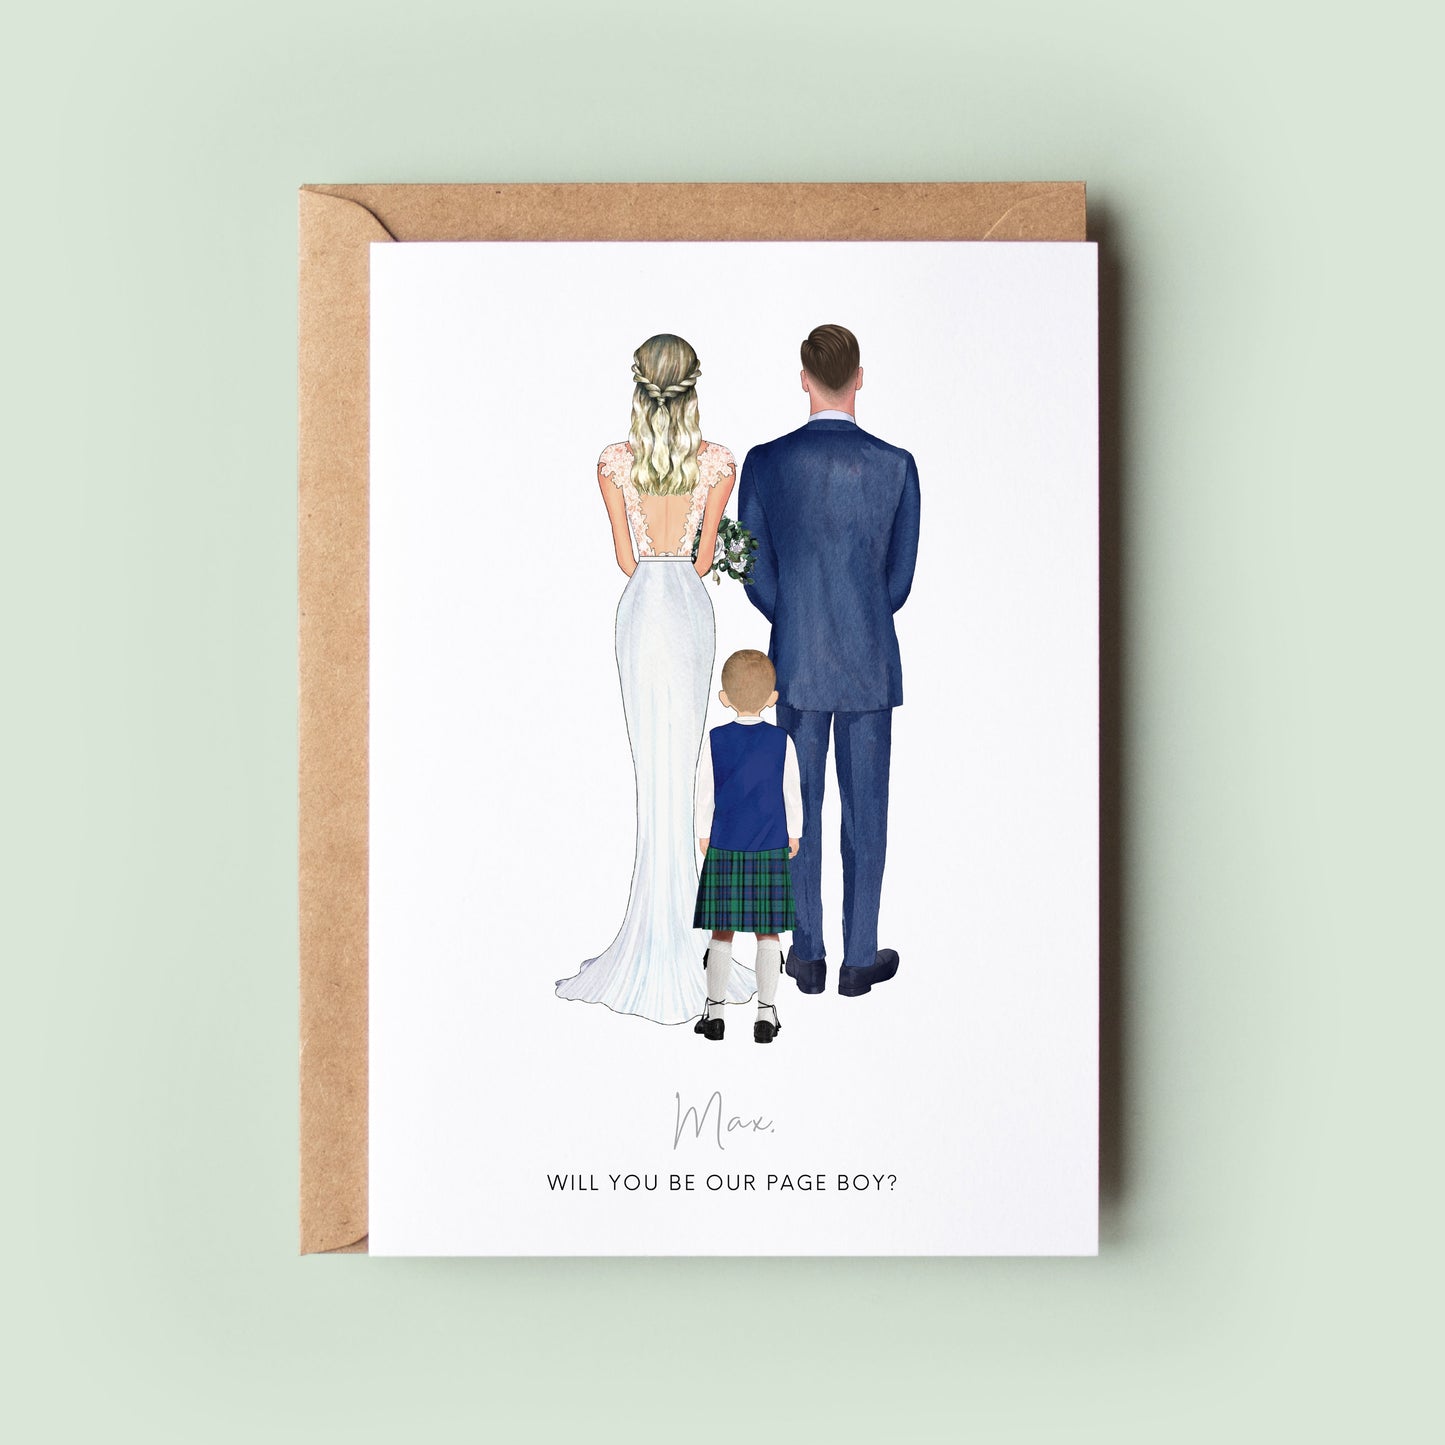 A personalised page boy proposal card with custom illustrations and space for a personal message from the bride and groom.